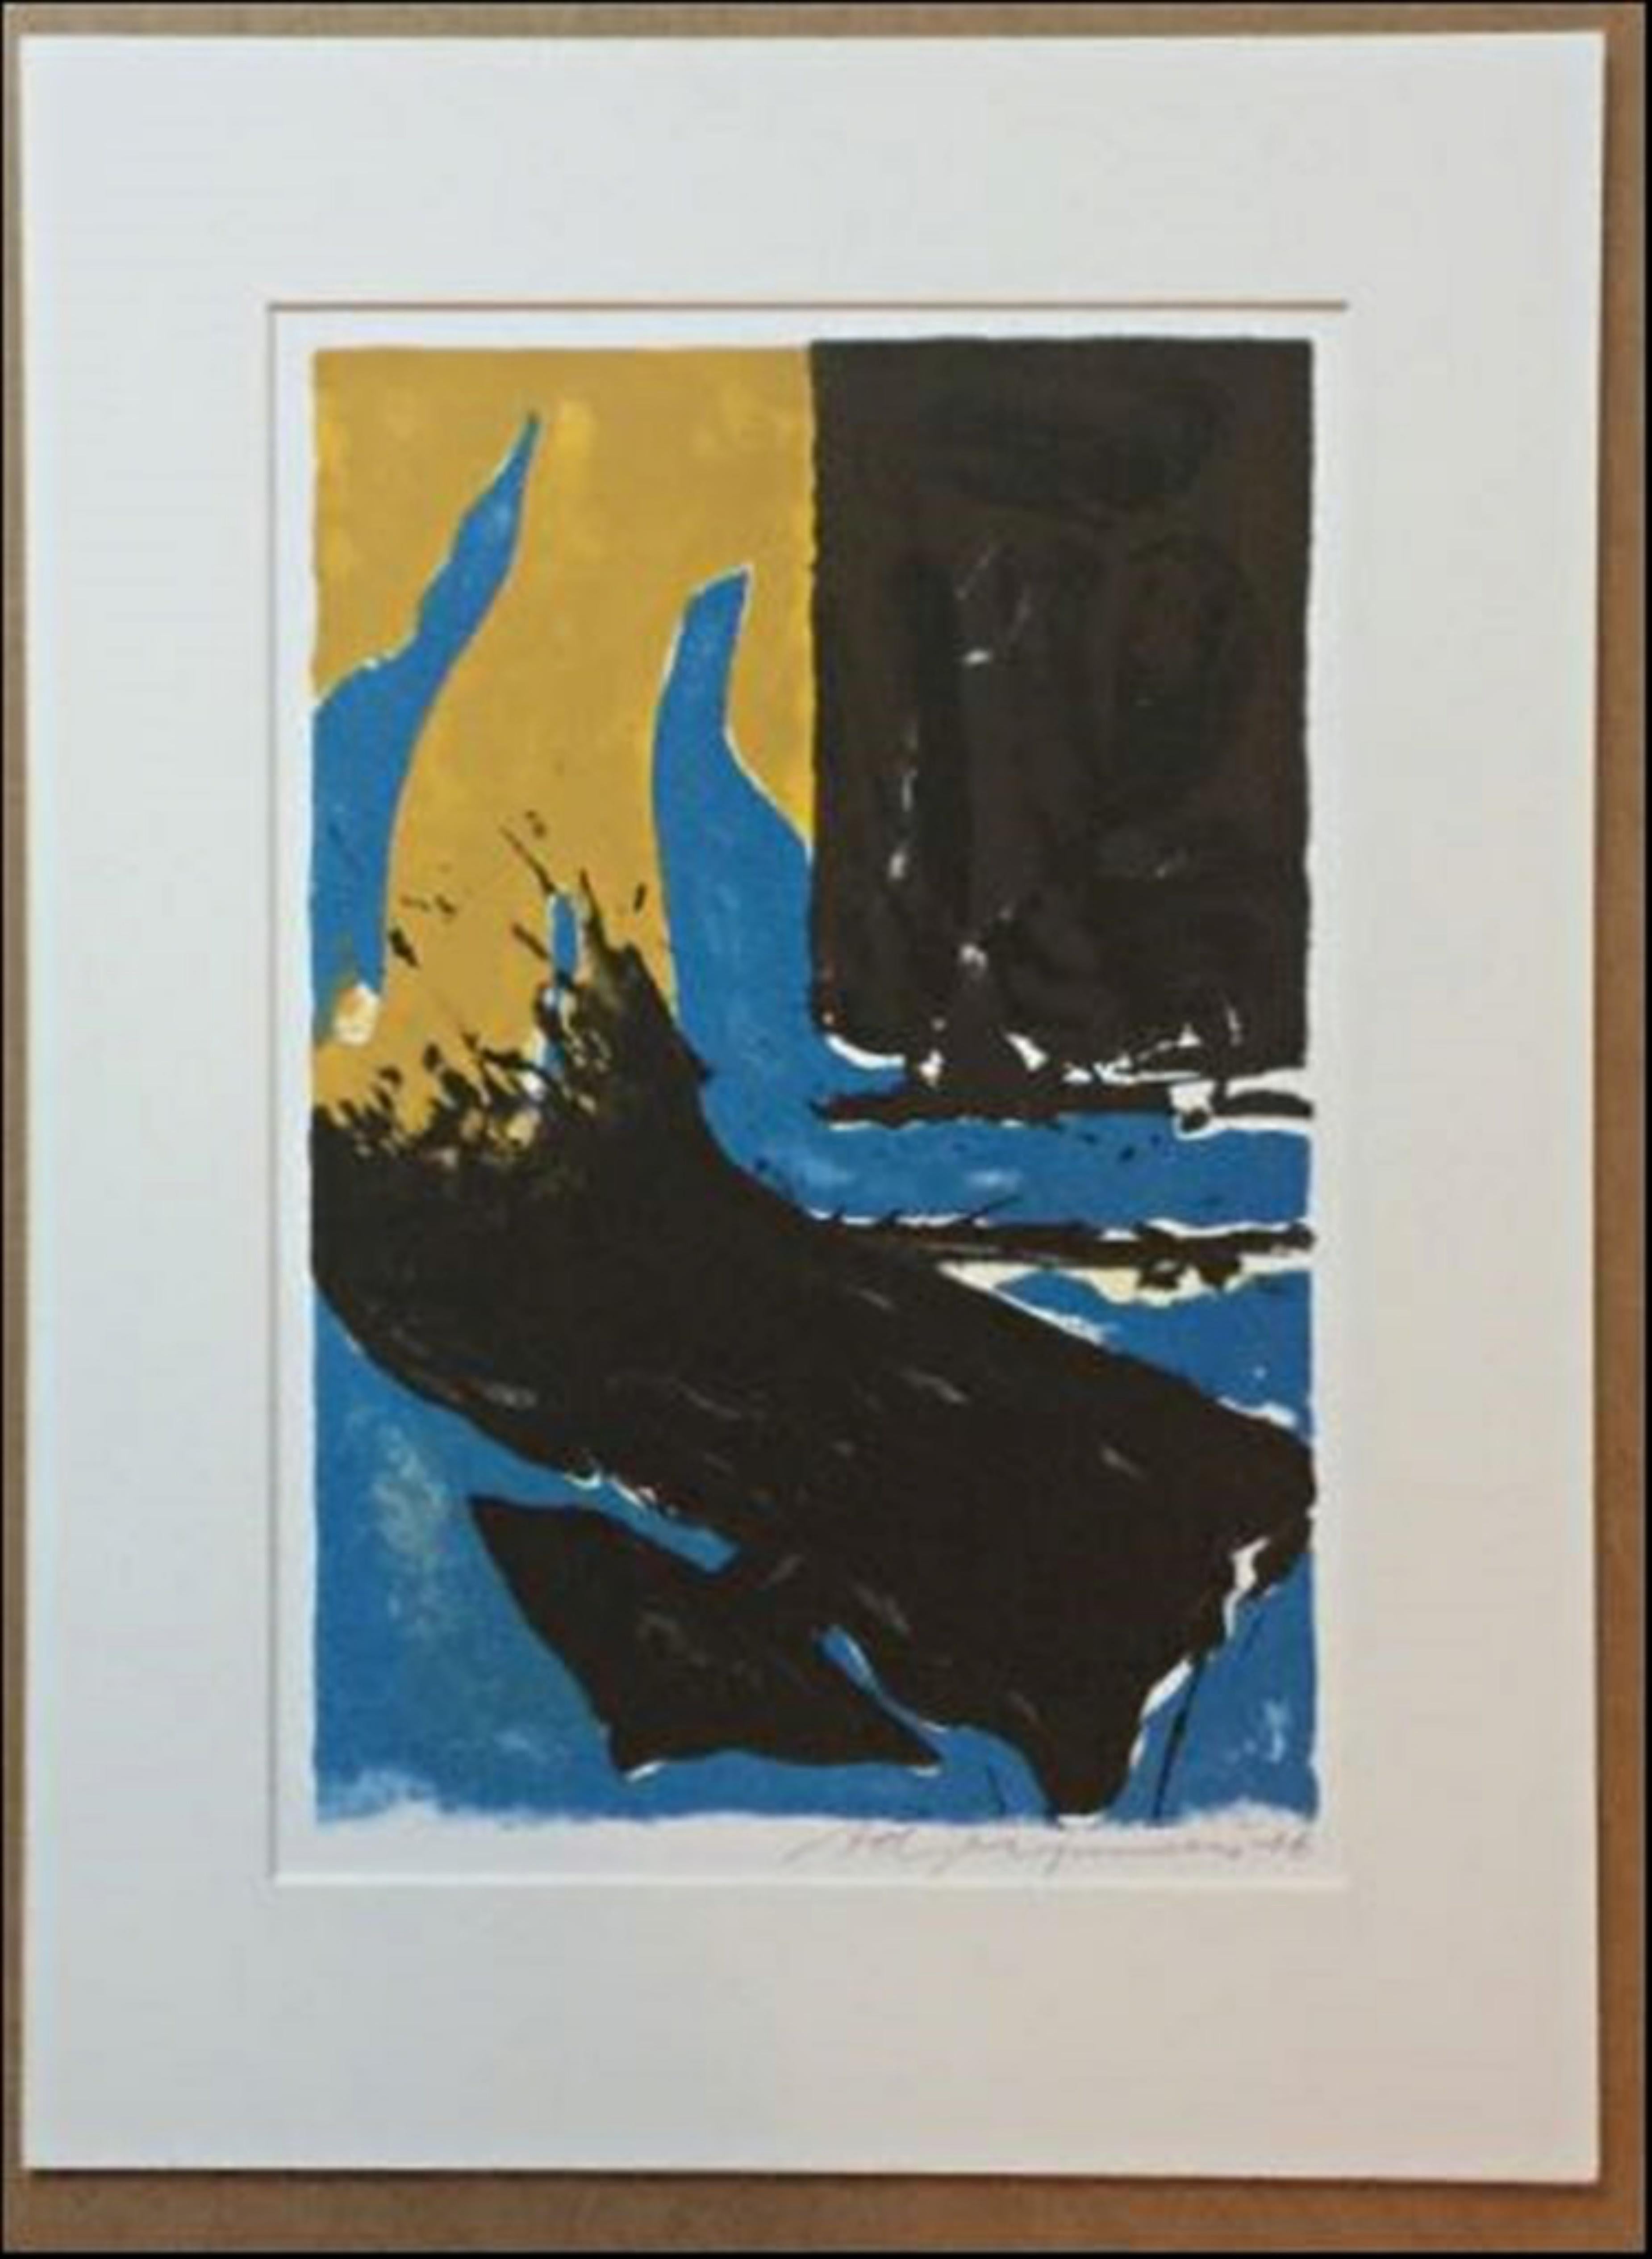 ADJA YUNKERS
Summer in Venice, 1966
Lithograph on wove paper
Signed and dated in pencil on the front
14 × 9 1/4 inches
Edition of 250 (unnumbered)
Published by The Print Club of Cleveland publication No. 43